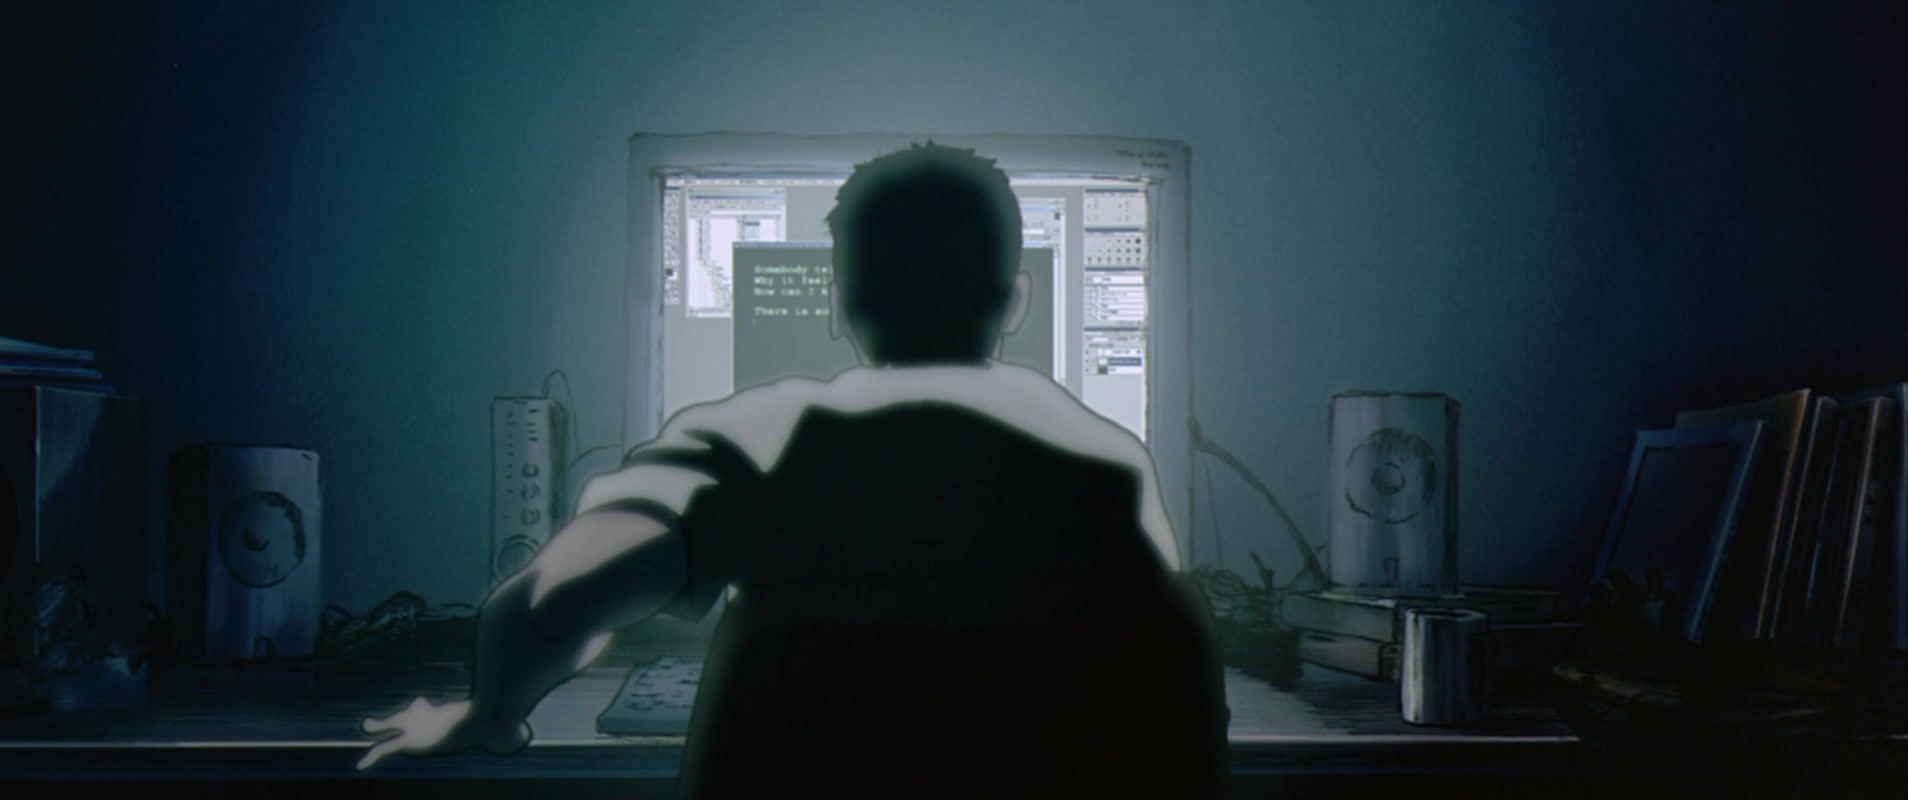 Michael Karl Popper (Debi Derryberry) logs on to a chatroom in The Animatrix 'Kid's Story (2003), Warner Bros. Animation